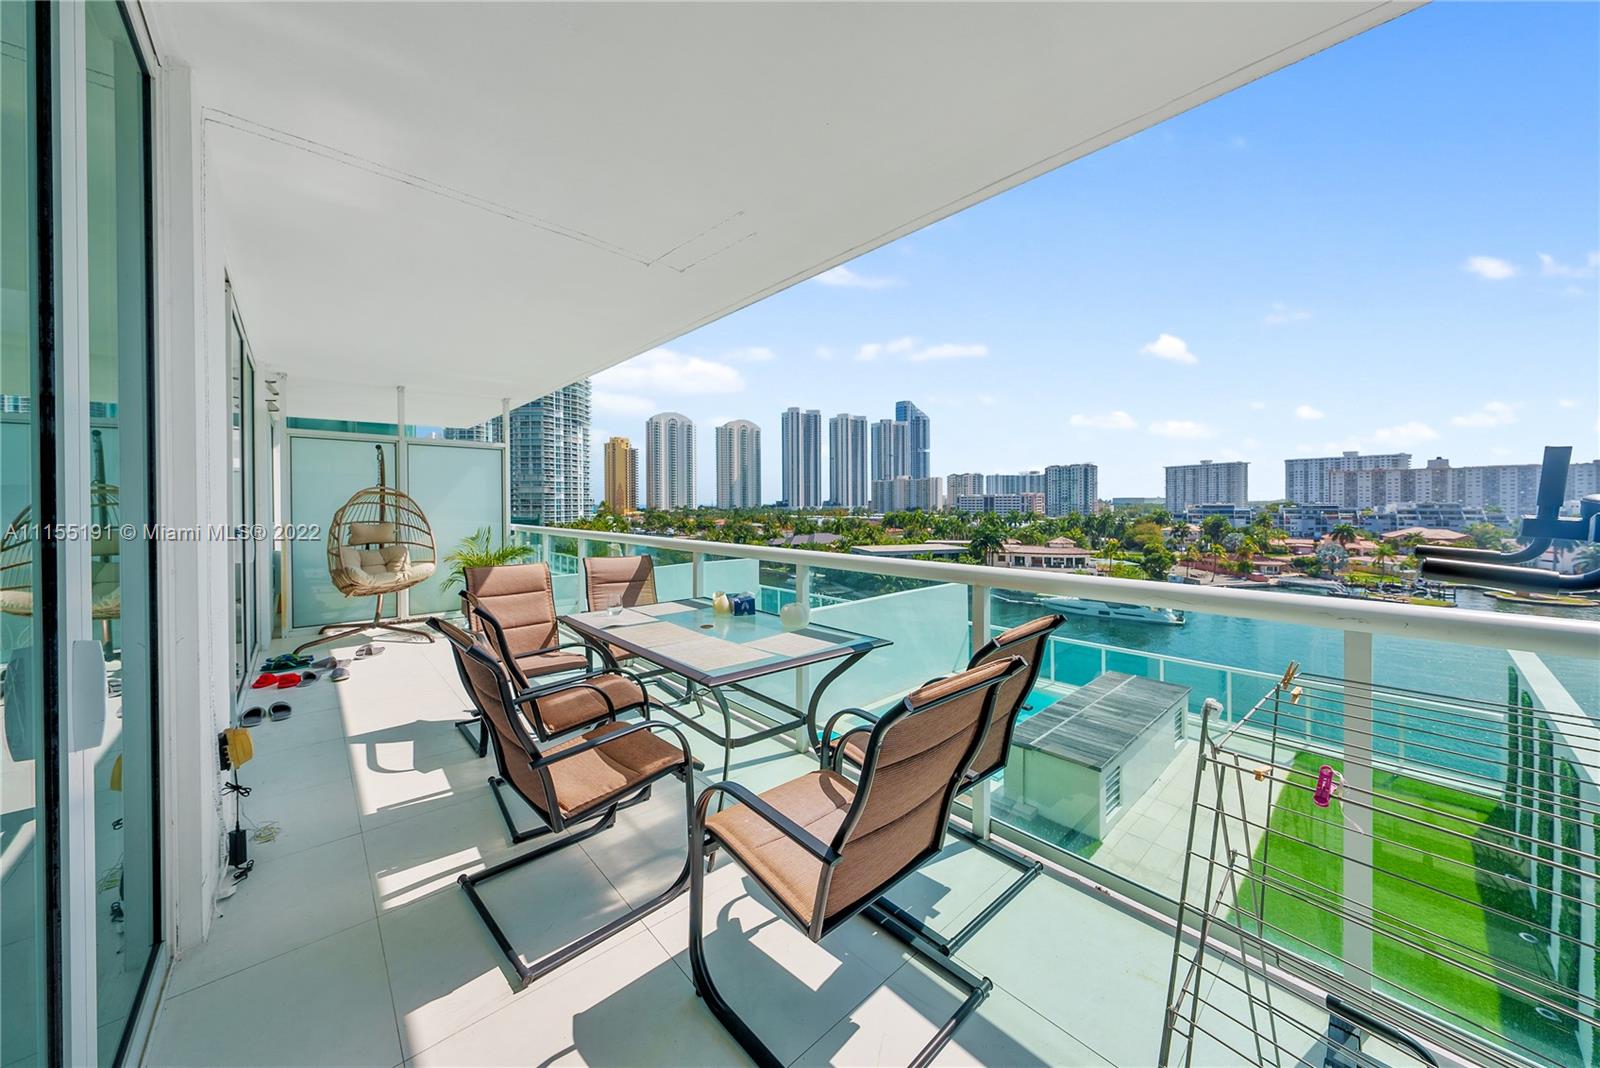 Most desirable model C at 400 Sunny Isles. Unobstructed panoramic water views from this 1 bedroom+ huge Den or 2nd bedroom & 2 full baths unit. Flow-through porcelain white flooring, custom closets, bathroom fixtures &window treatments. European appls. & high tech eco-friendly kitchen. 400 sunny Isles offers private marina, pool& lounge overlooking the bay, spa, fitness center, tennis court, restaurant & an owner's shuttle to beach with fullservice upon arrival. Unit is currently vacant and ready to move-in.